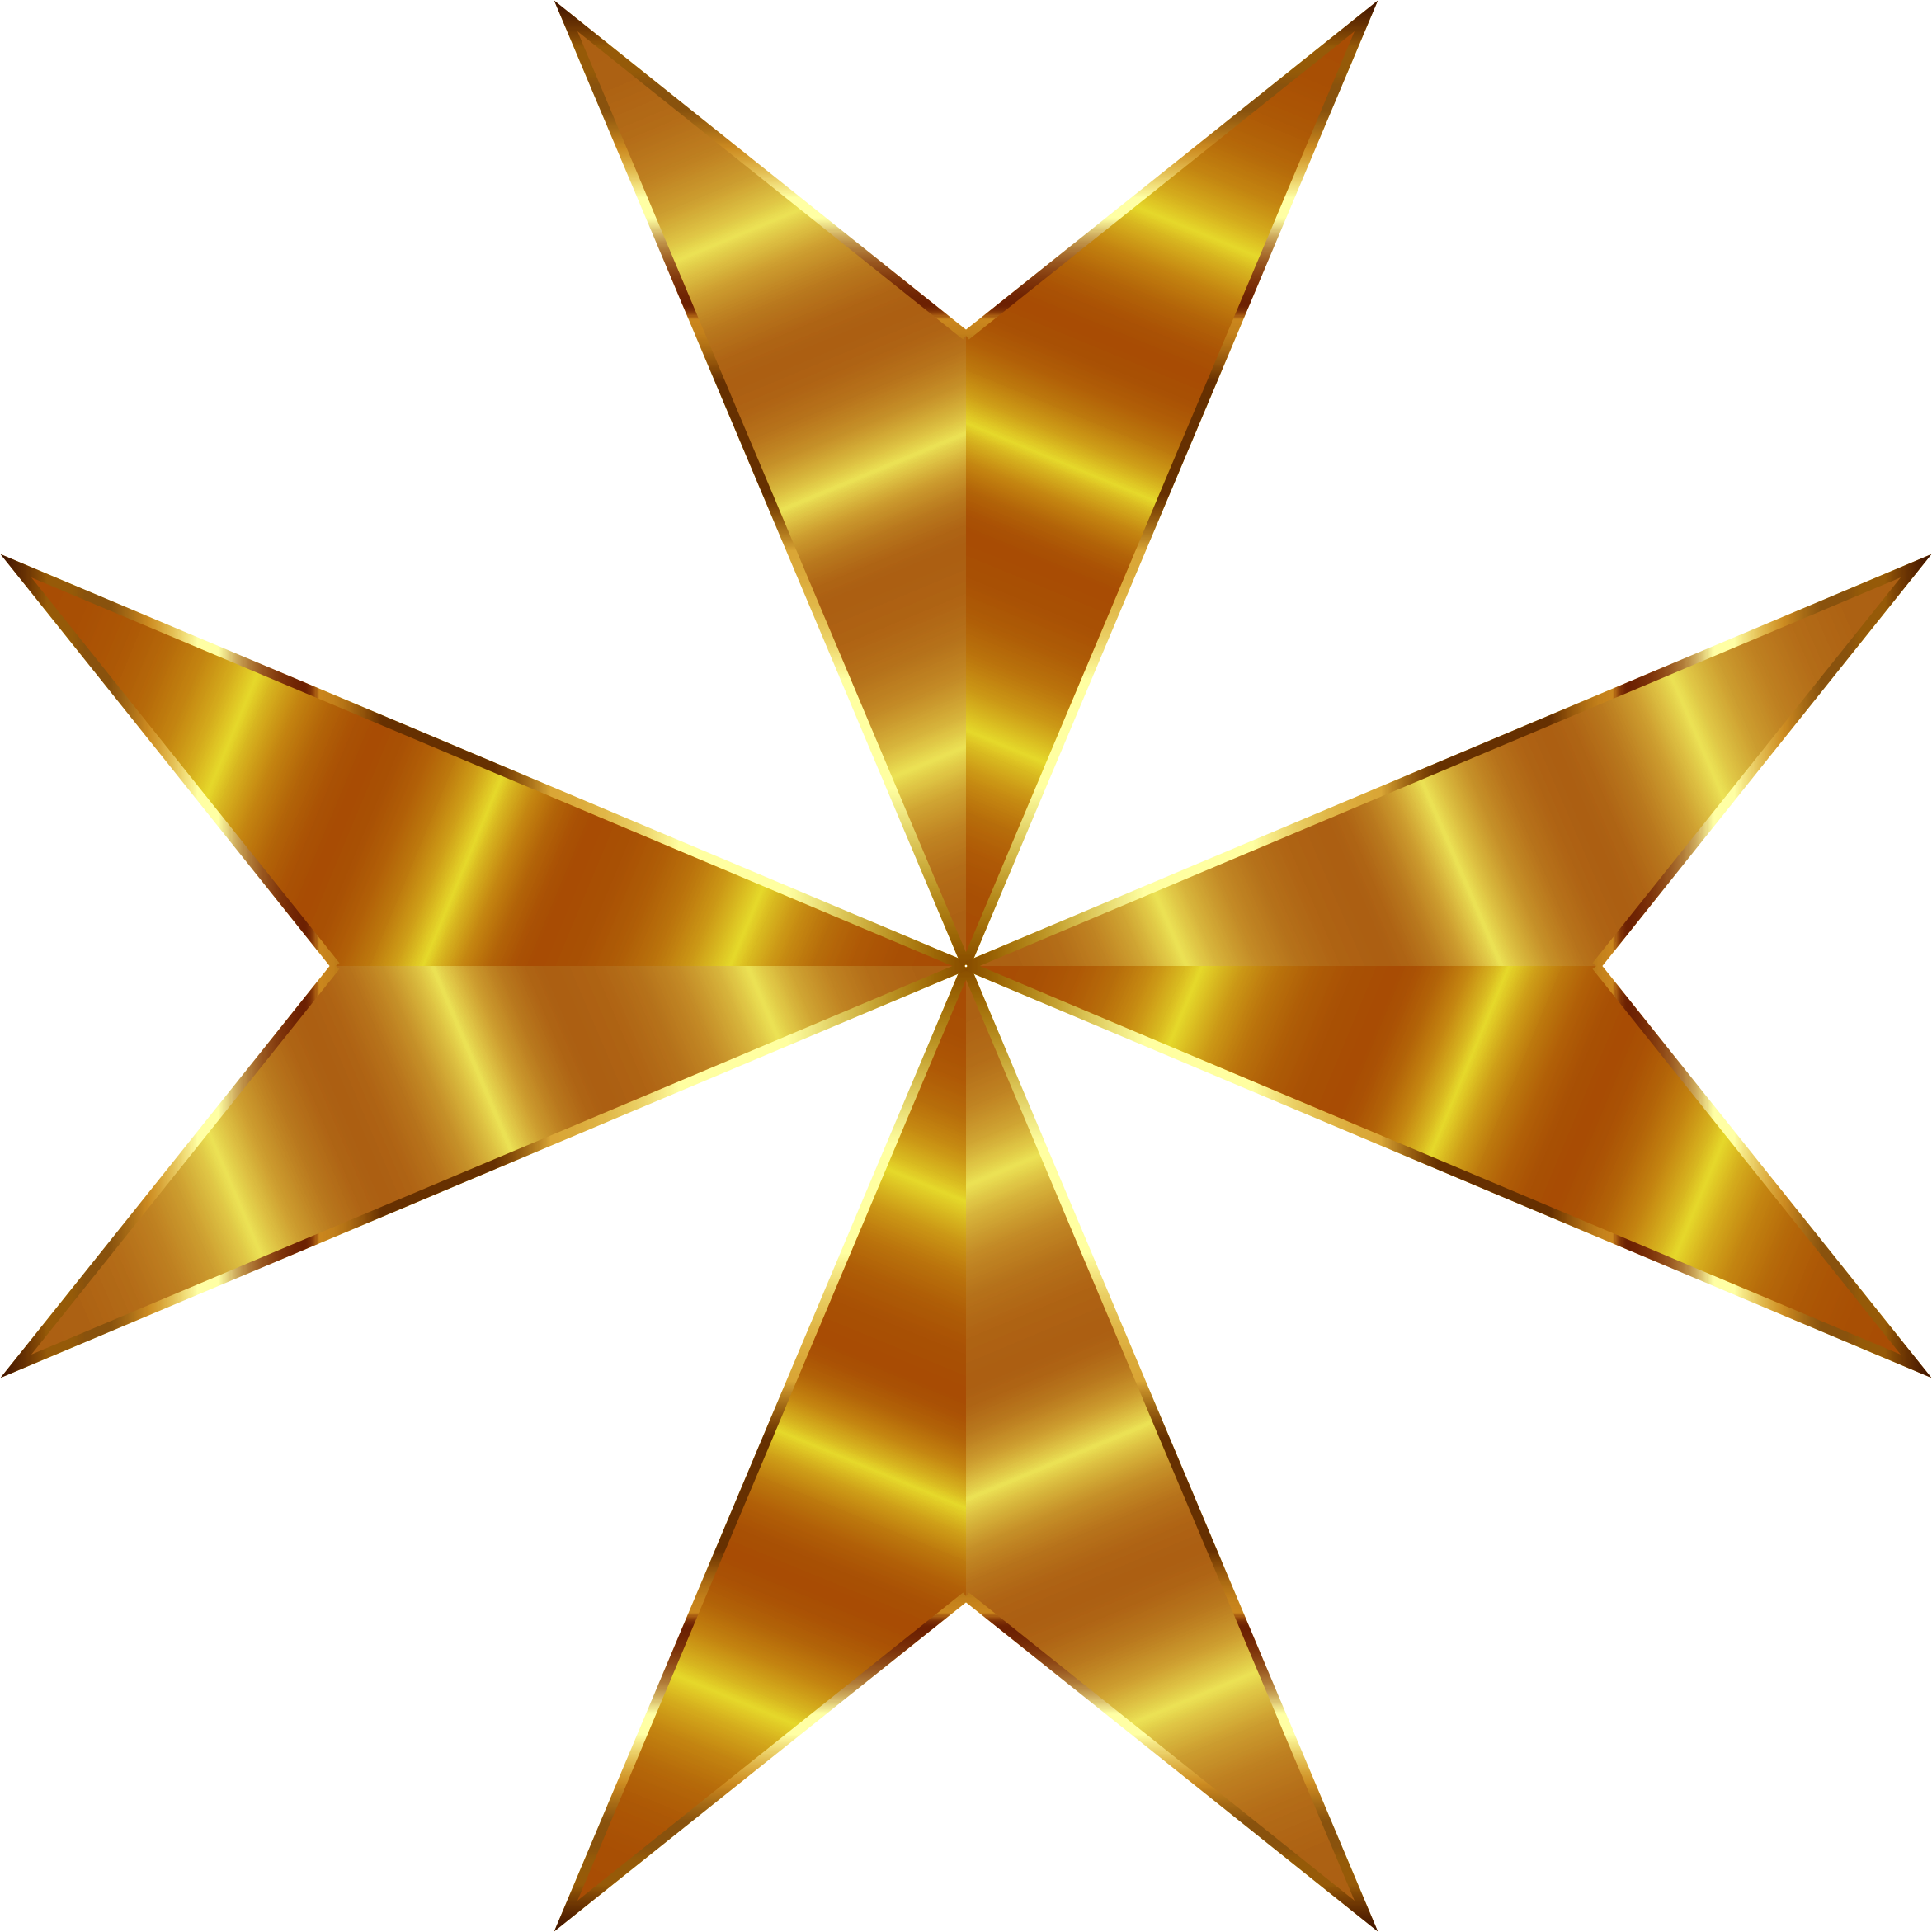 images-of-gold-stars-free-download-on-clipartmag